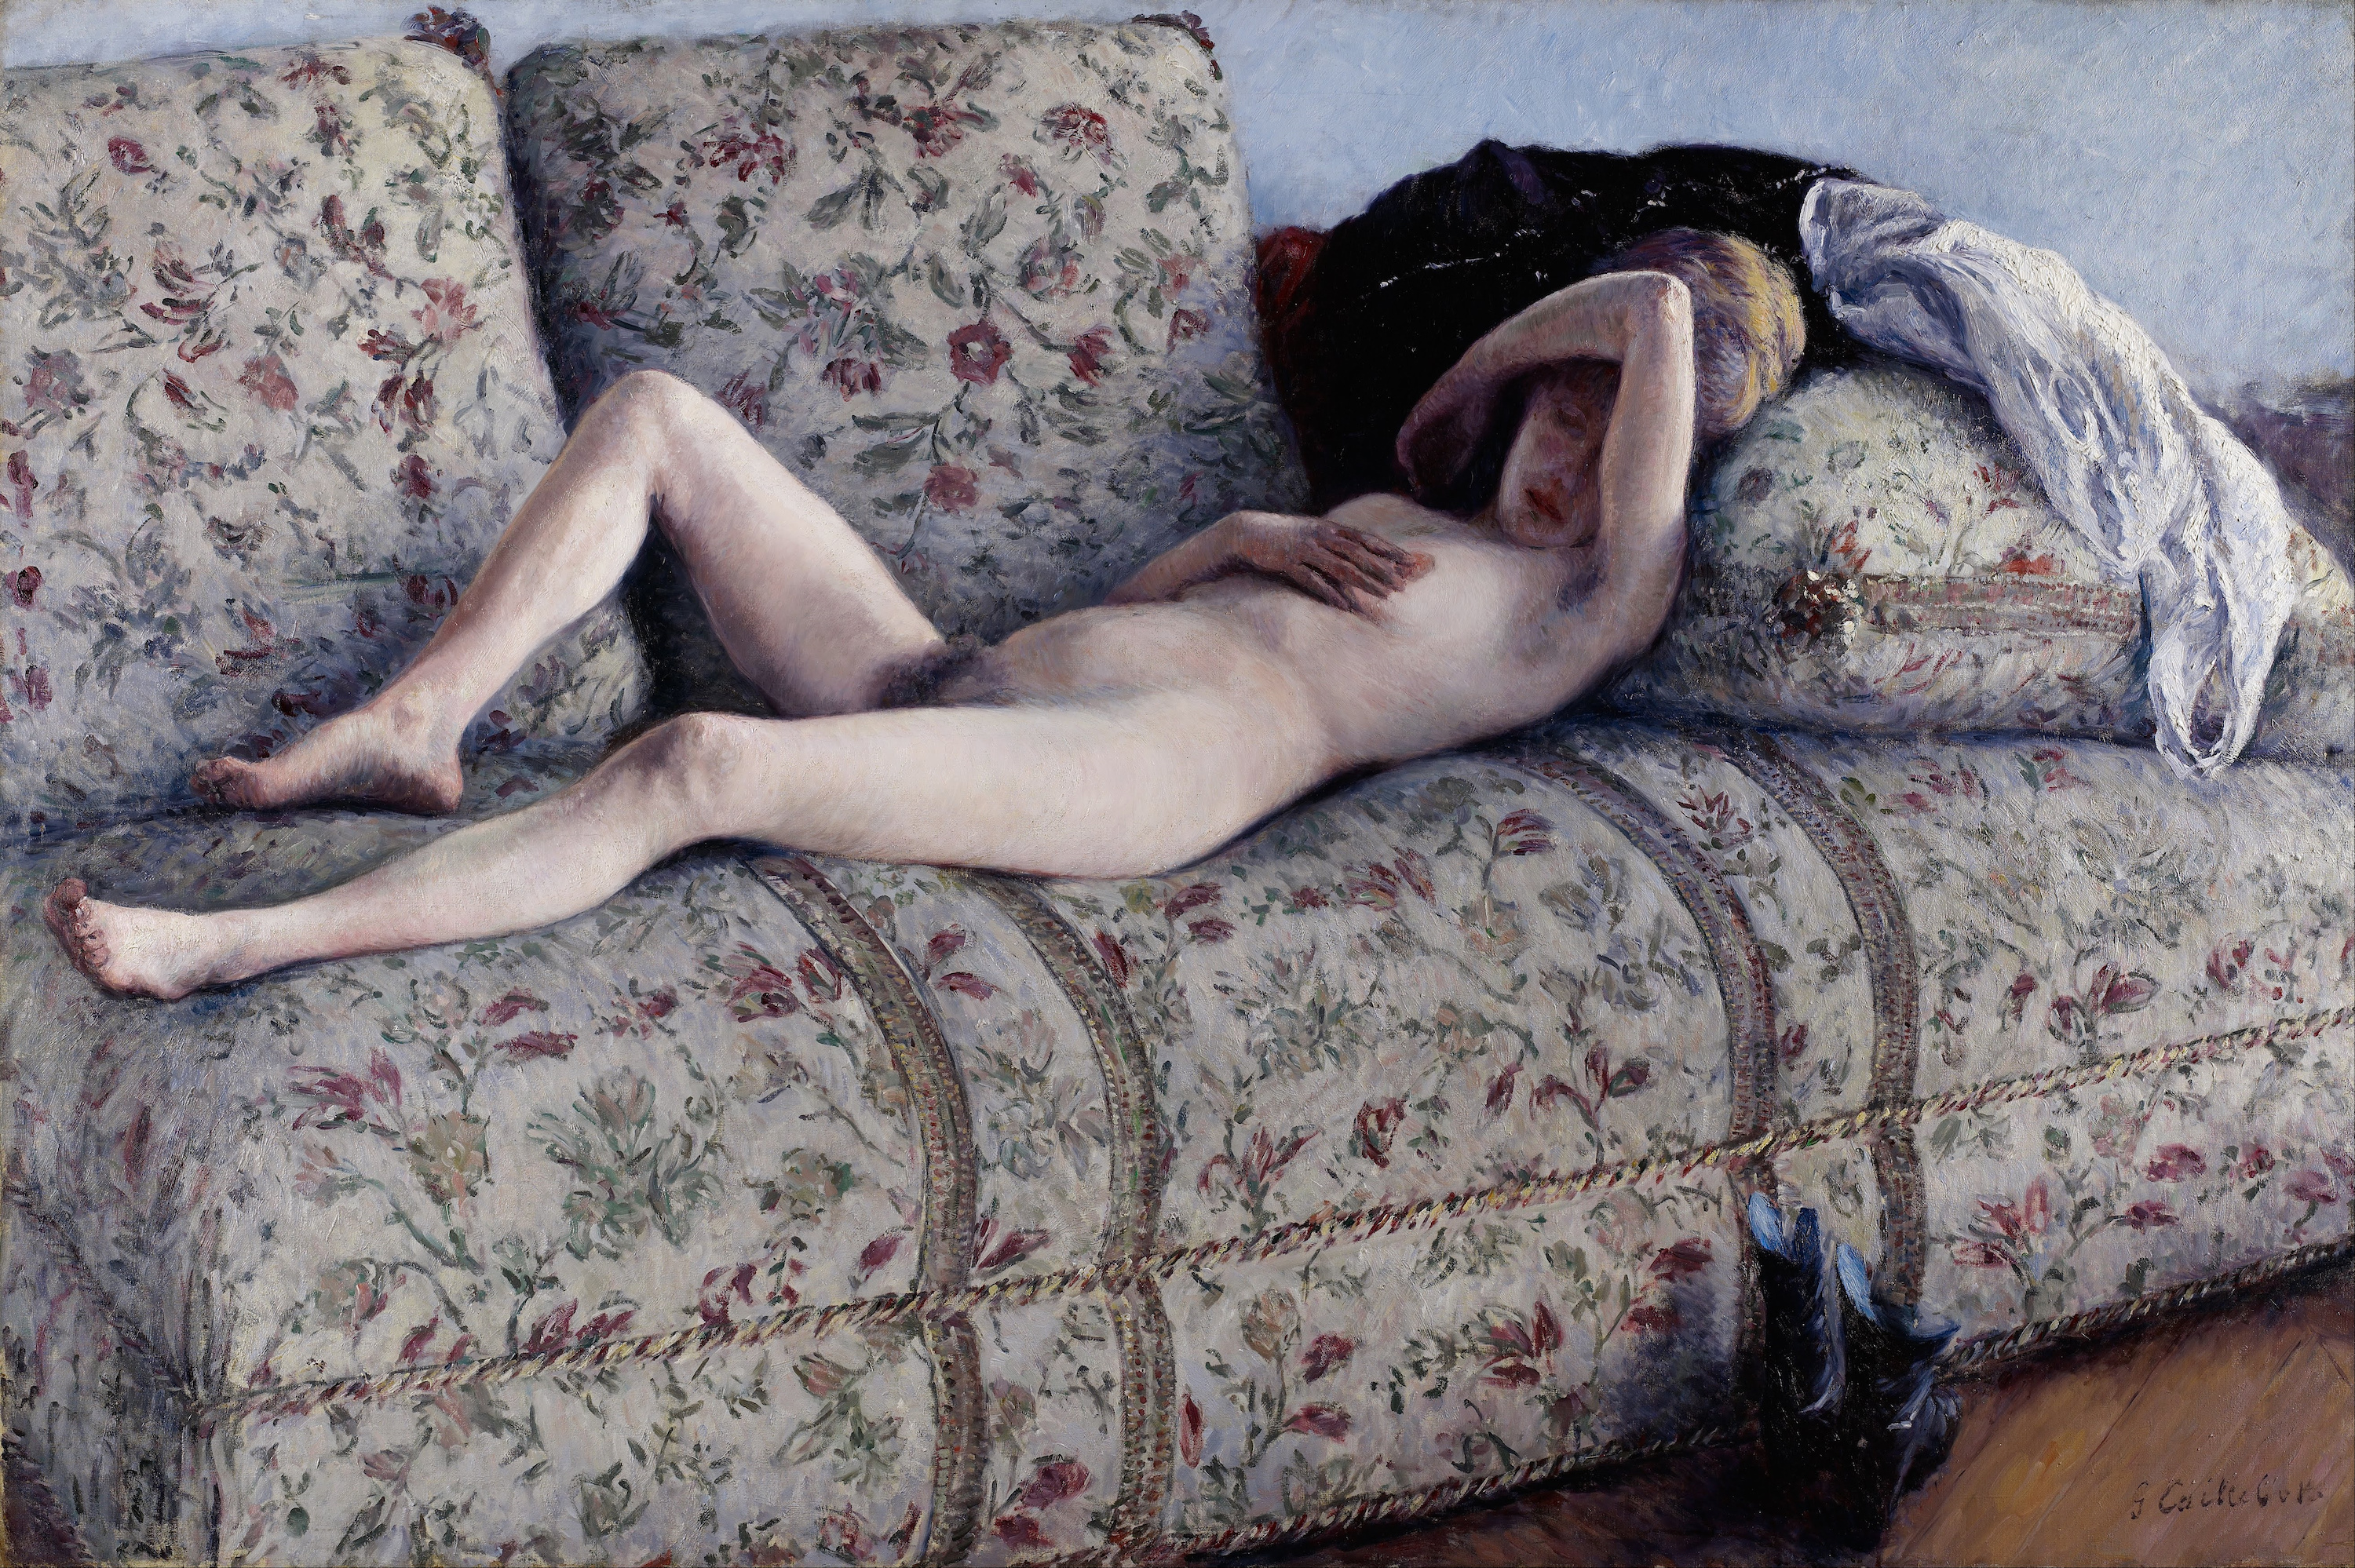 Nude on a Couch by Gustave Caillebotte - c. 1880 - 129.54 x 195.58 cm Minneapolis Institute of Art